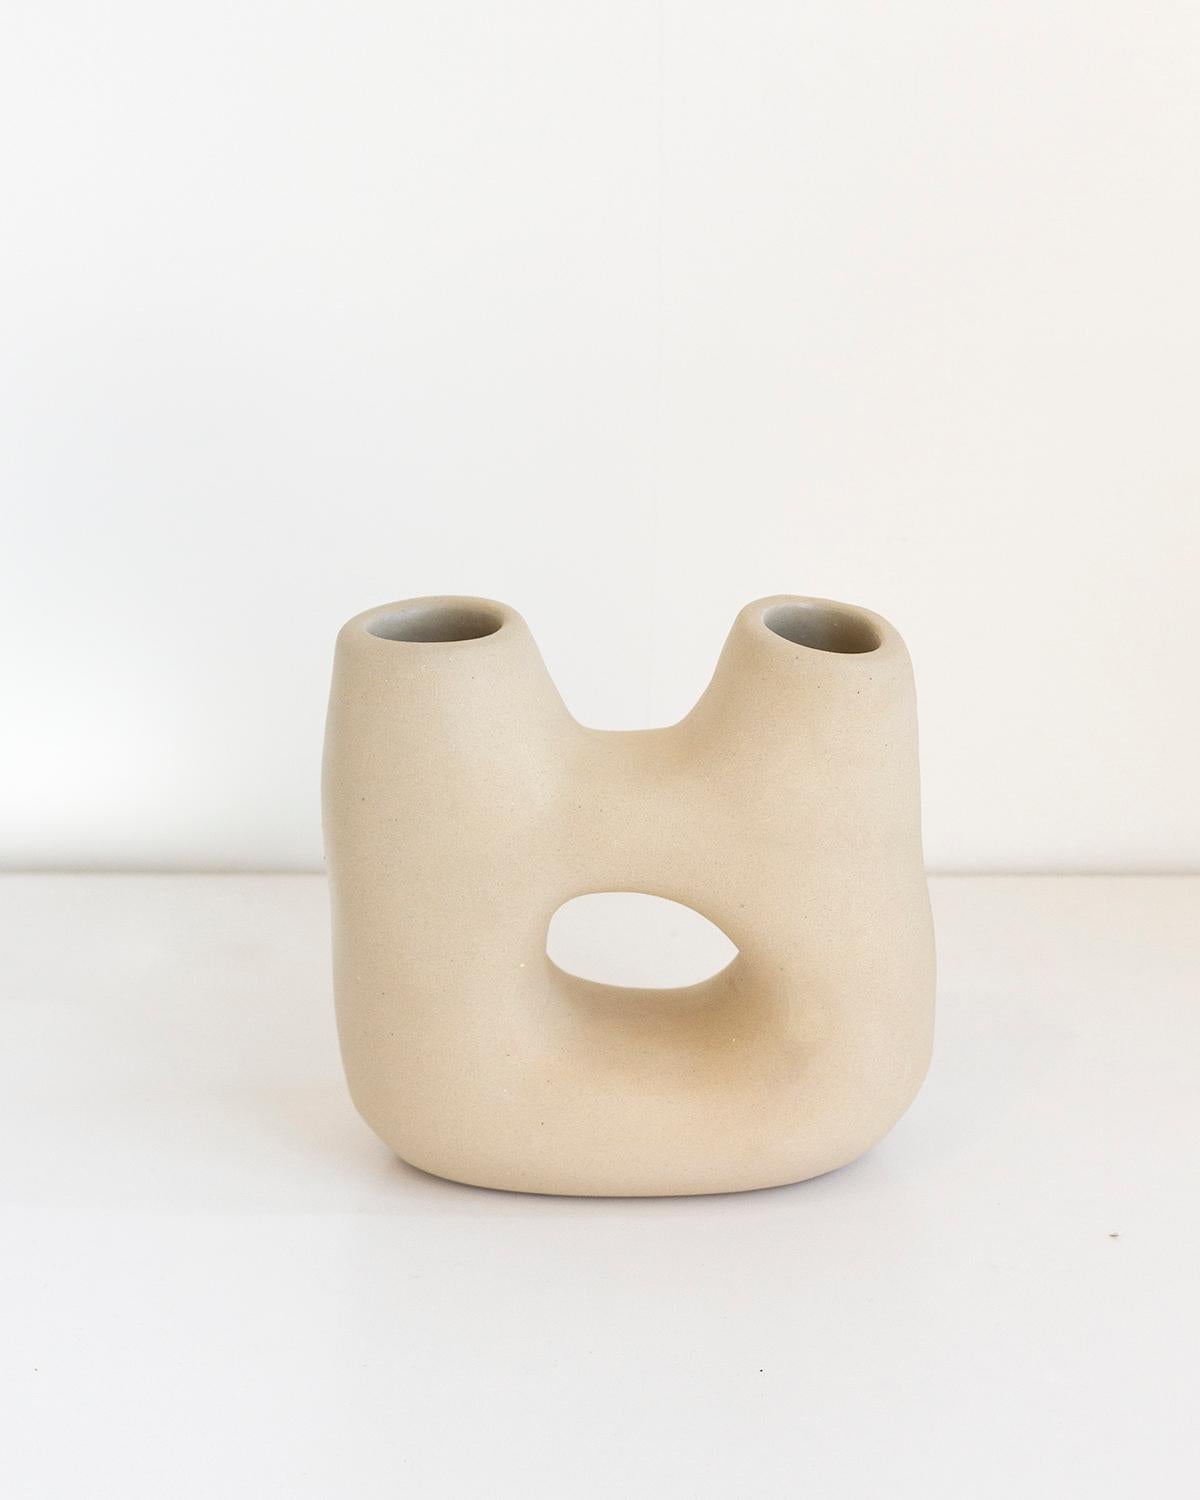 Hand-Crafted Dual Clay Handmade Organic Modern Vase Natural Cream Beige For Sale